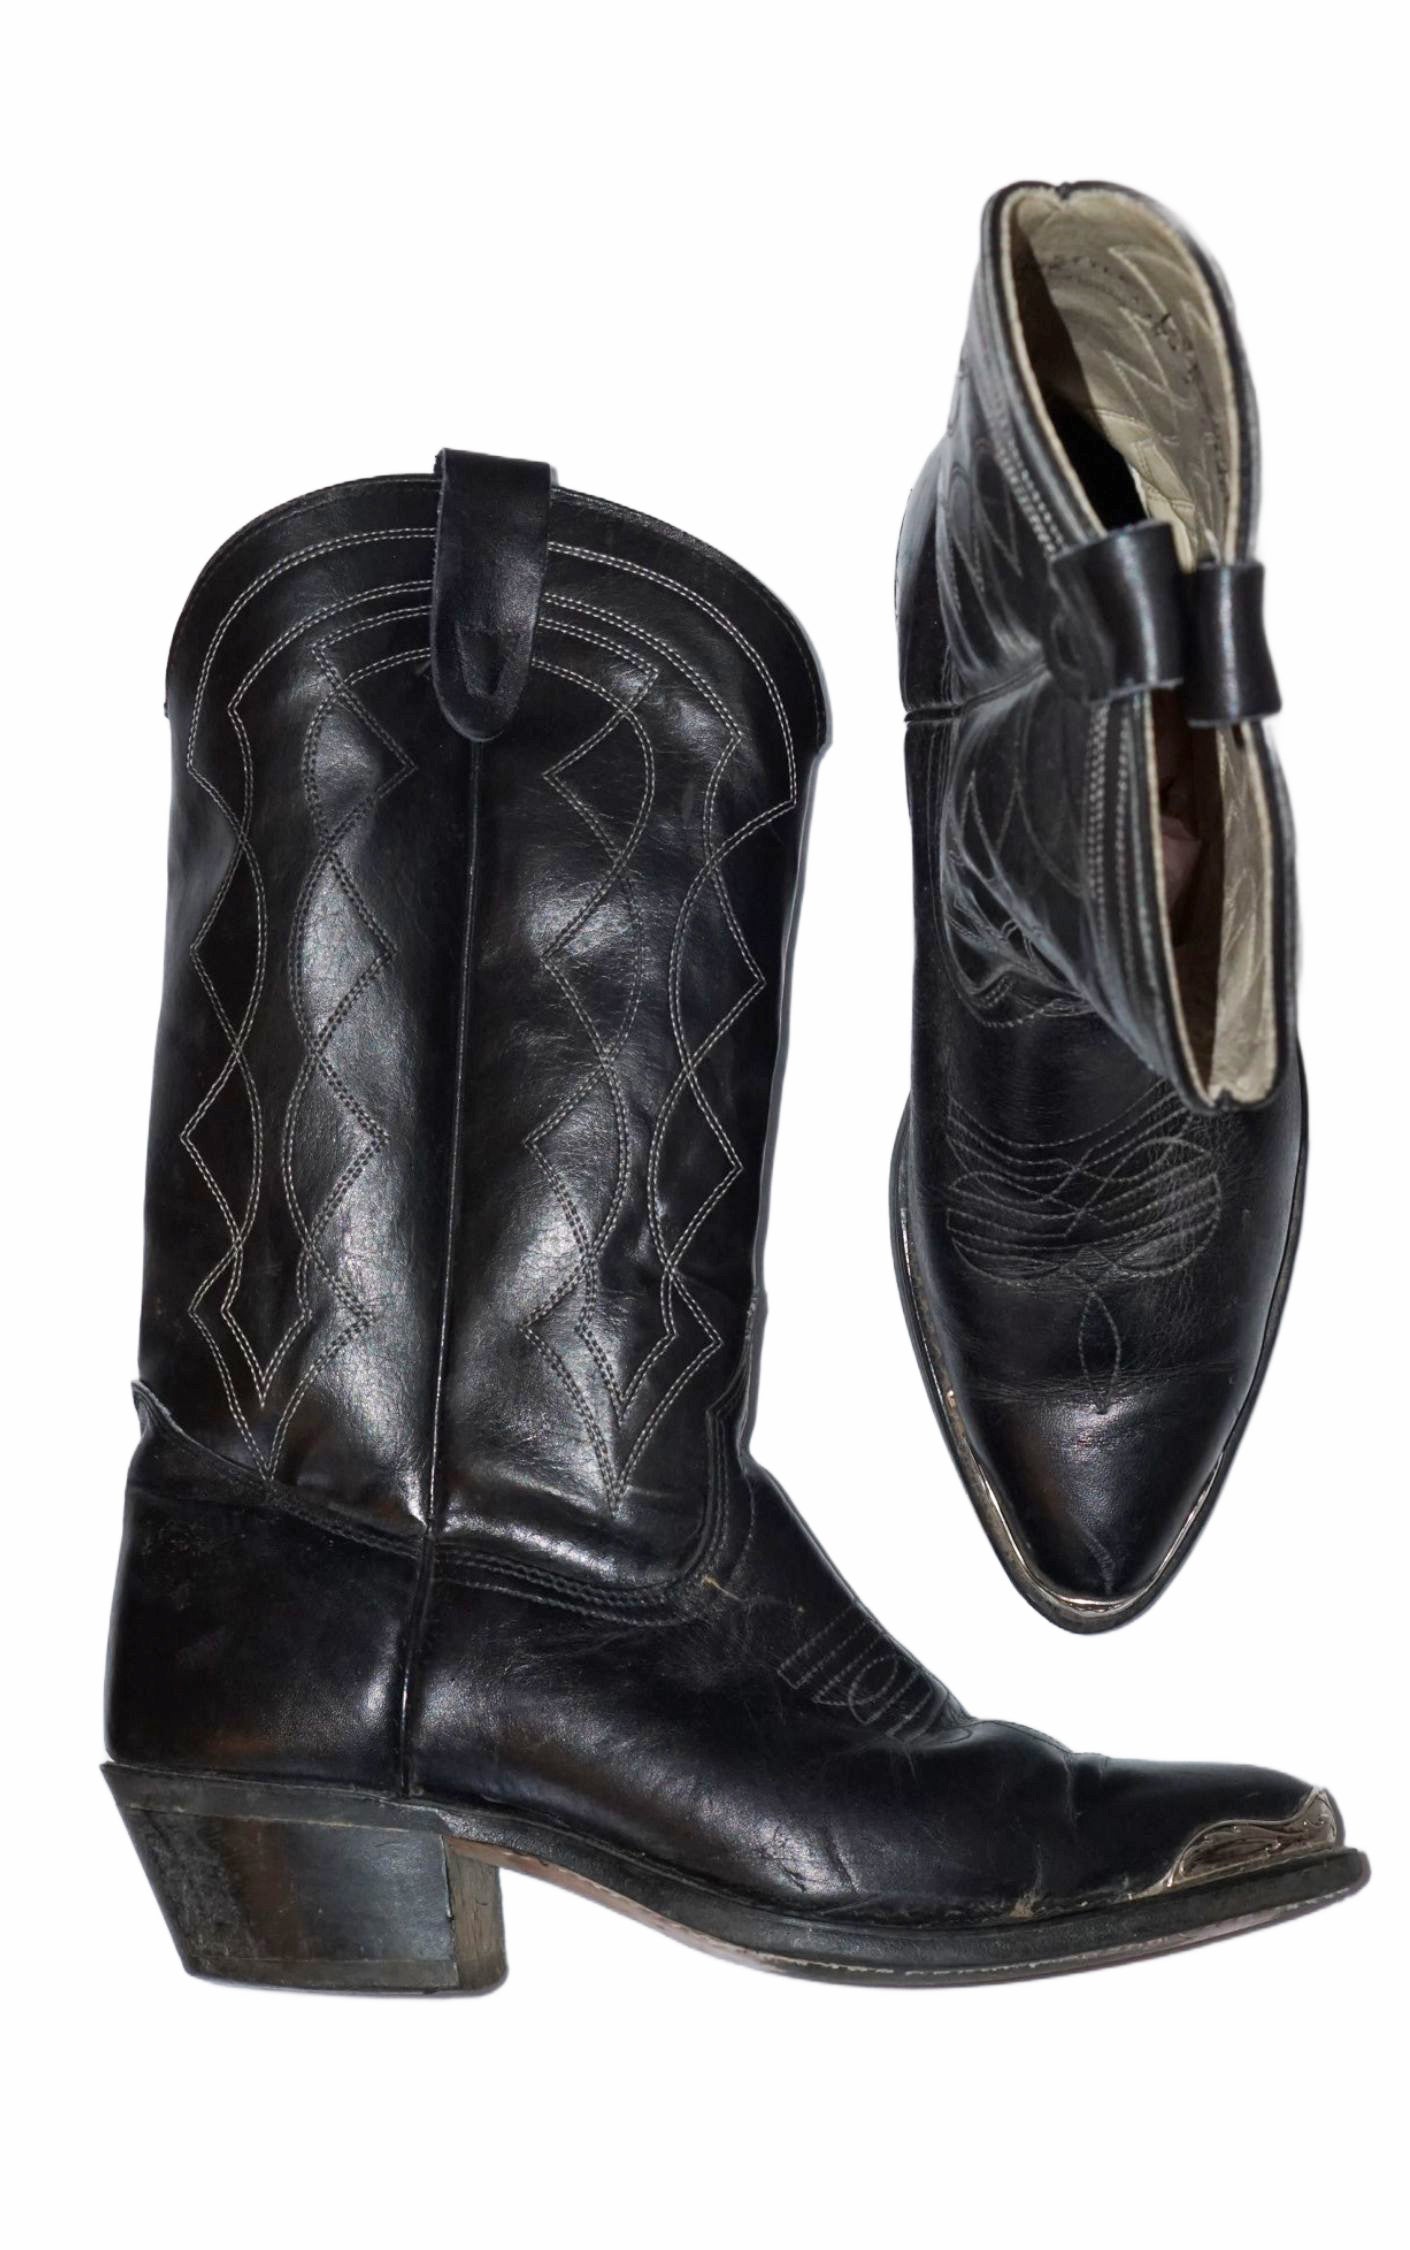 VINTAGE Texas Black Leather Metal Tips Western Cowboy Boots resellum